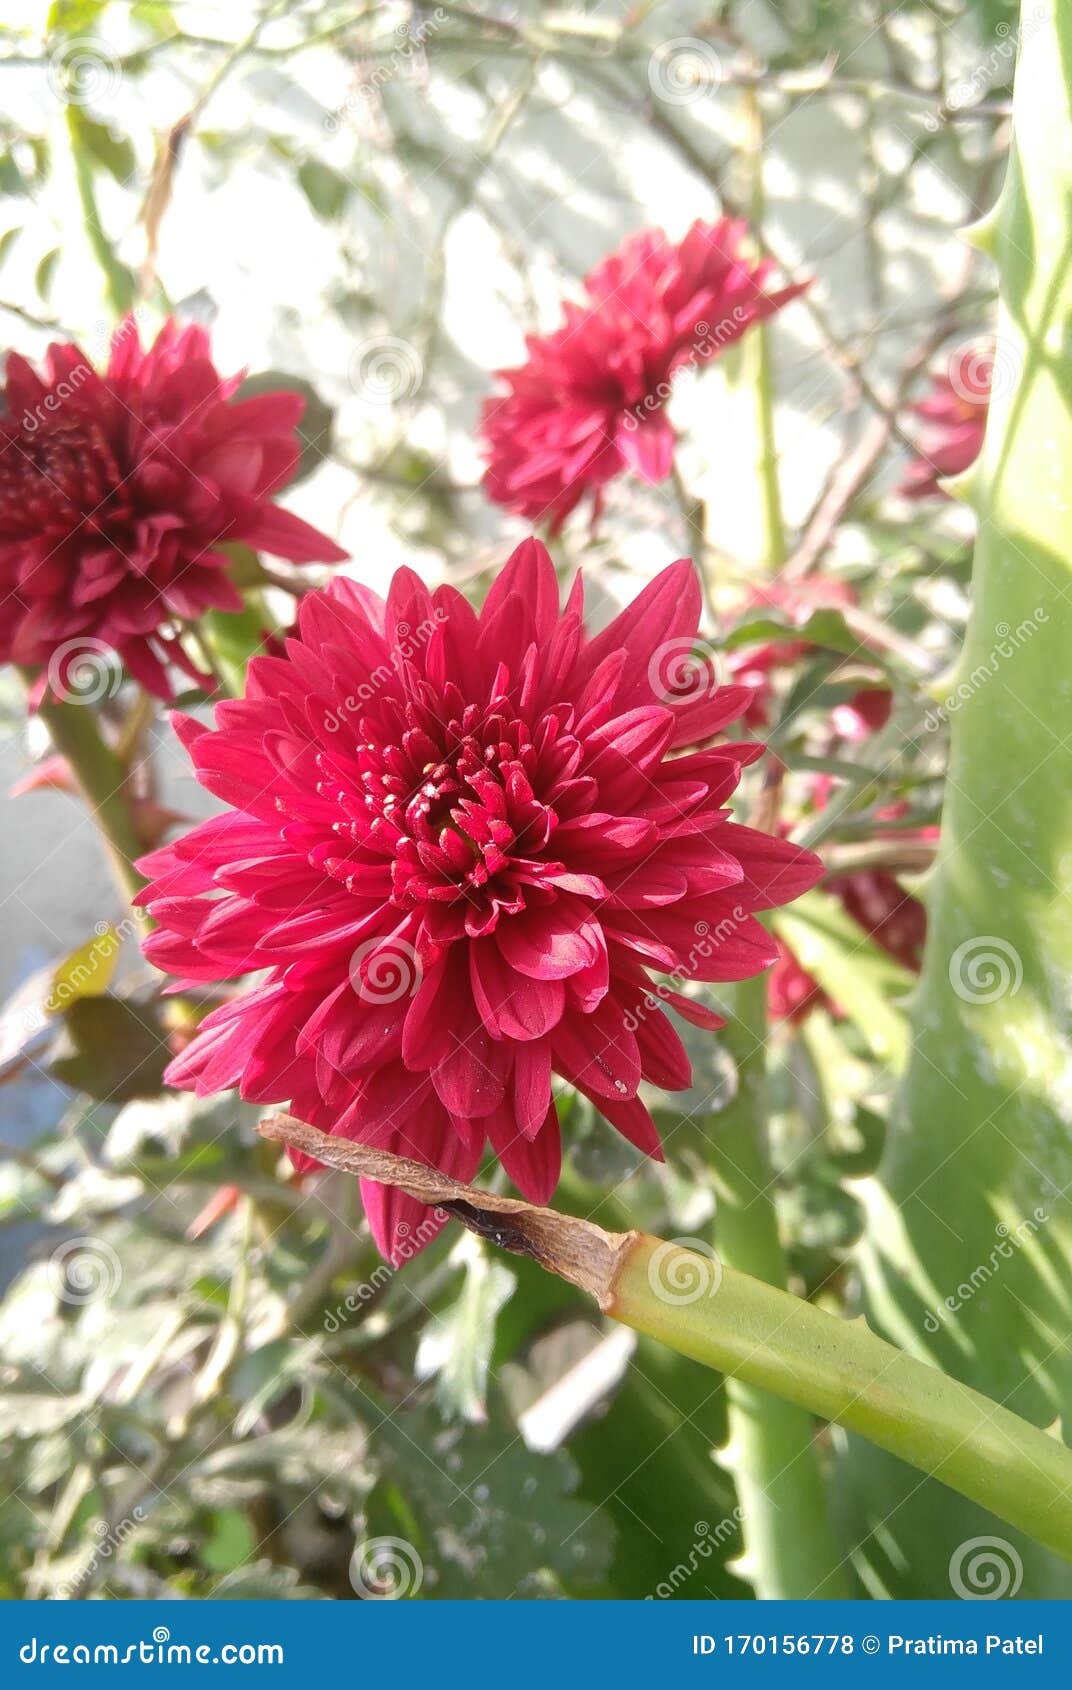 Beautiful Flowers Blooming in the Branch of Green Leaves Plant Growing Garden, Photography, Natural Beauty Stock Photo - Image of natural, blooming: 170156778